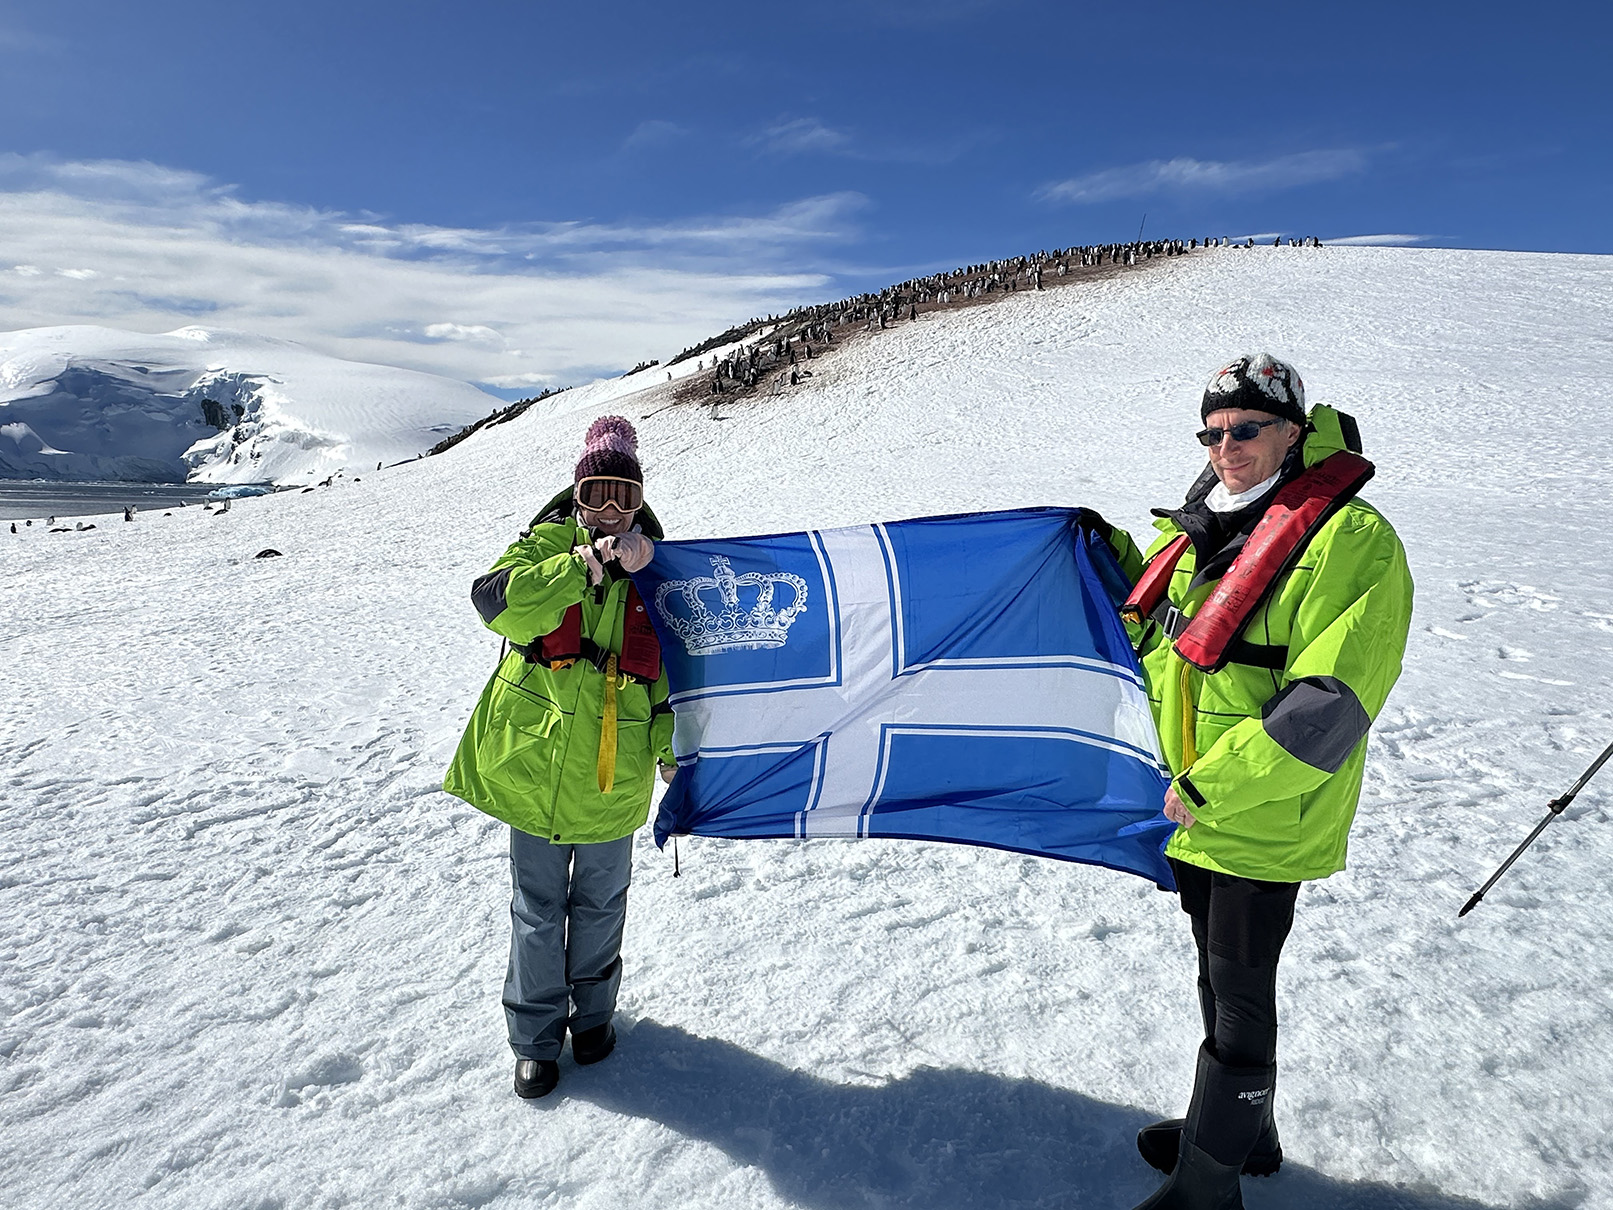 Two people holding a flag in the snow on an antarctic mountain.